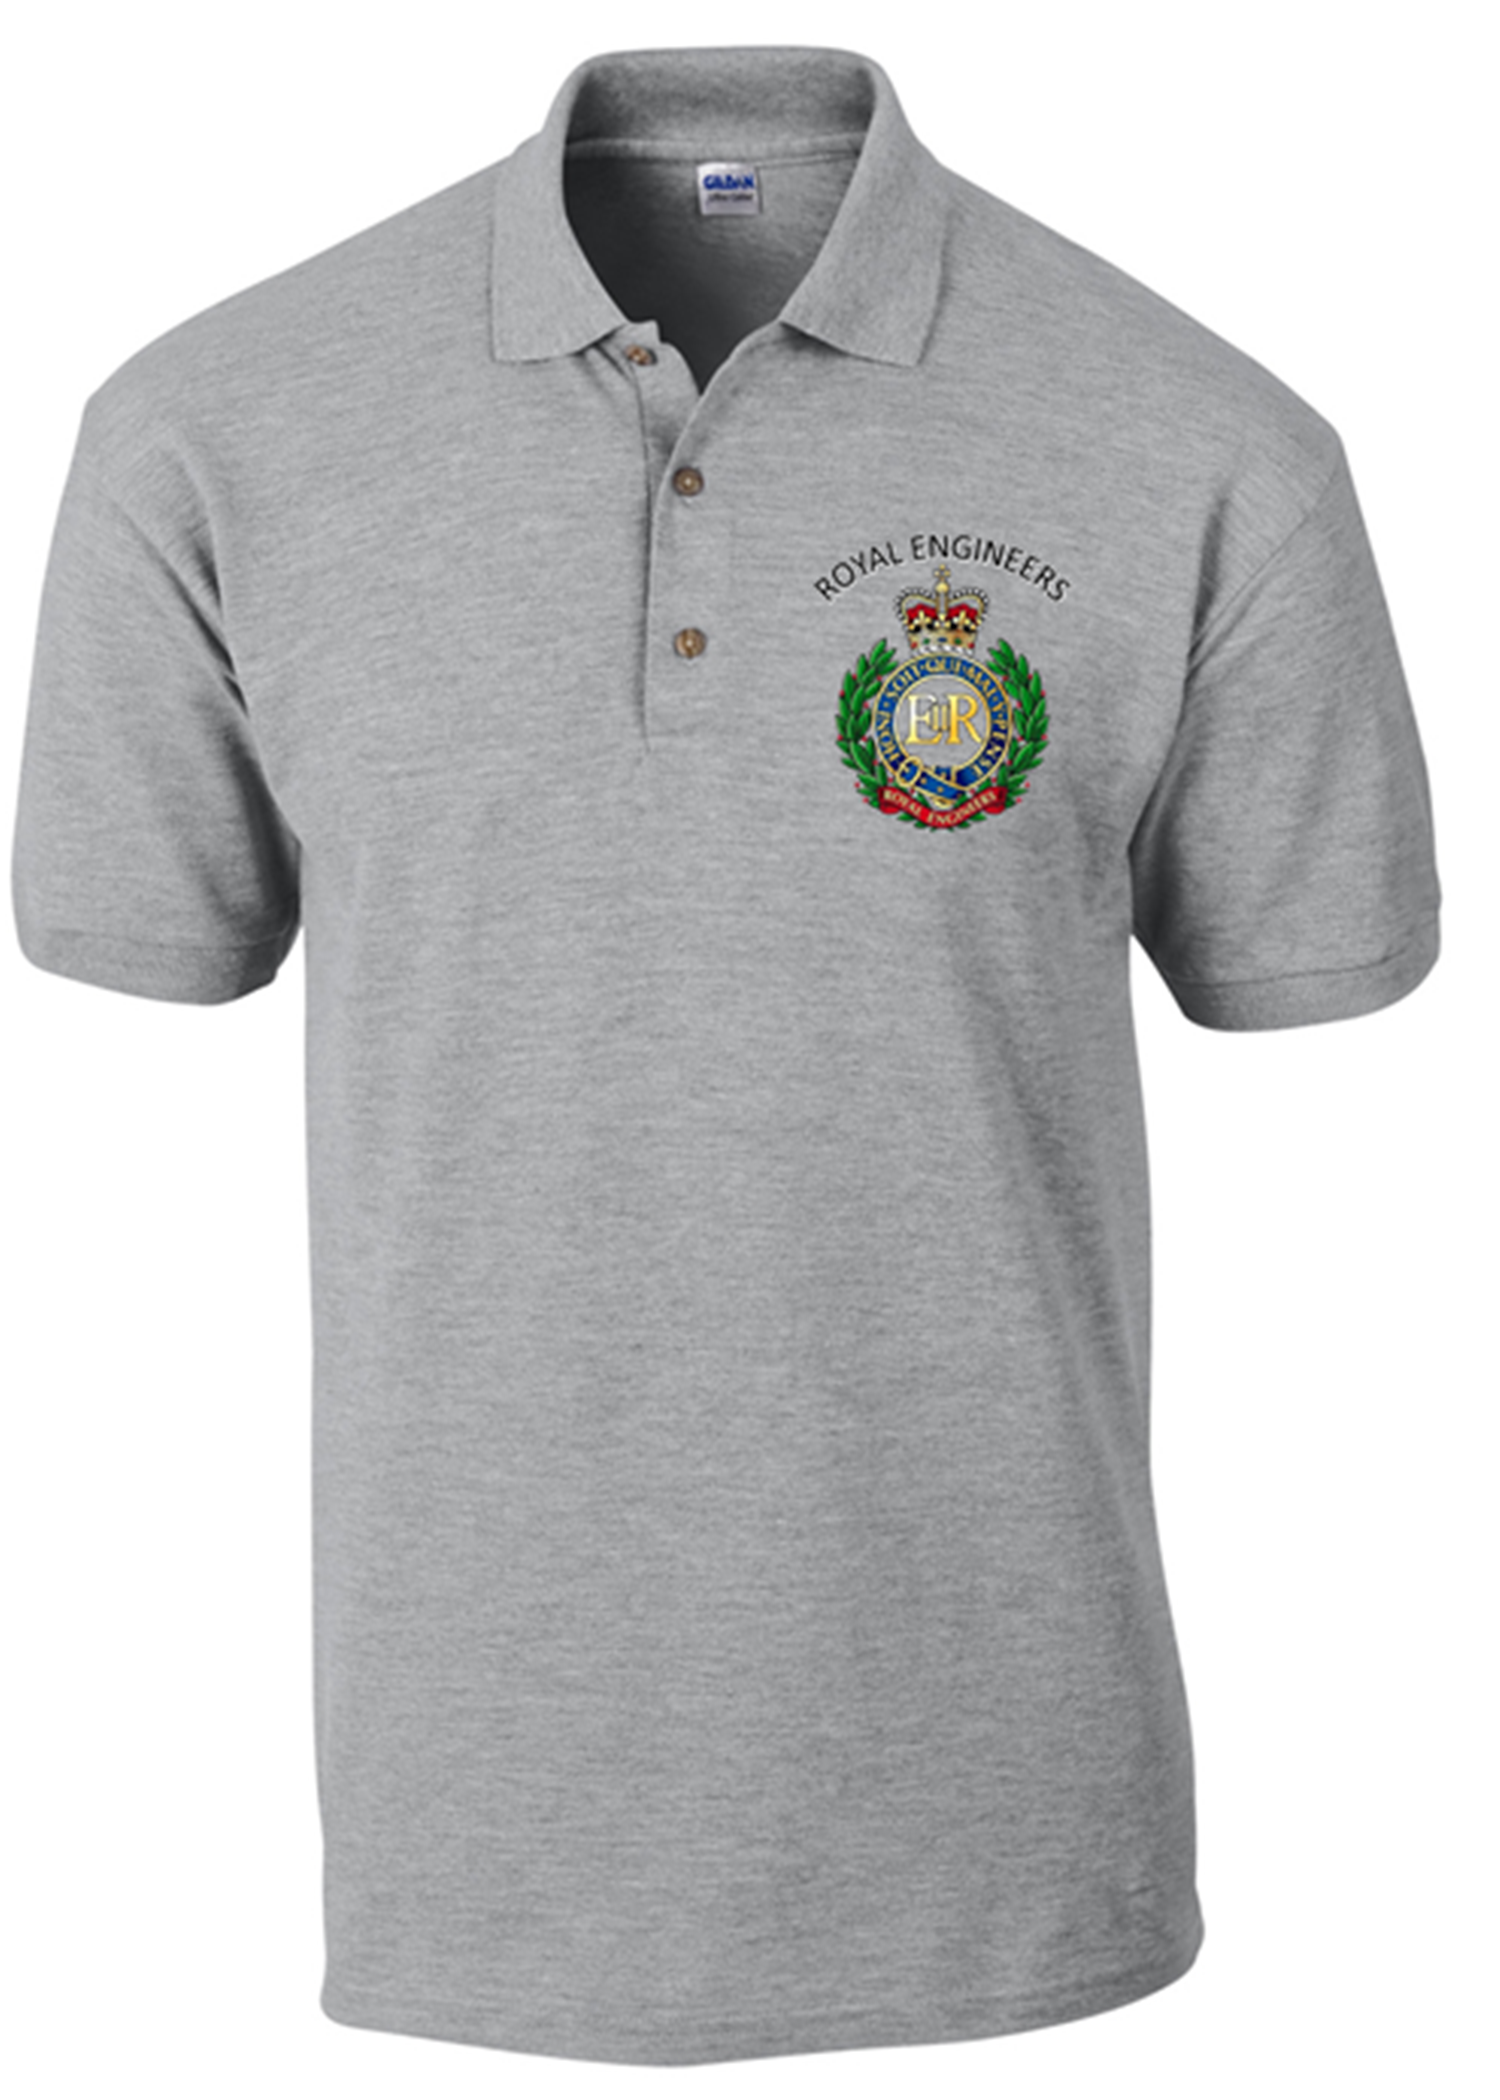 Royal Engineer Polo Shirt - Army 1157 kit S / Grey Army 1157 Kit Veterans Owned Business